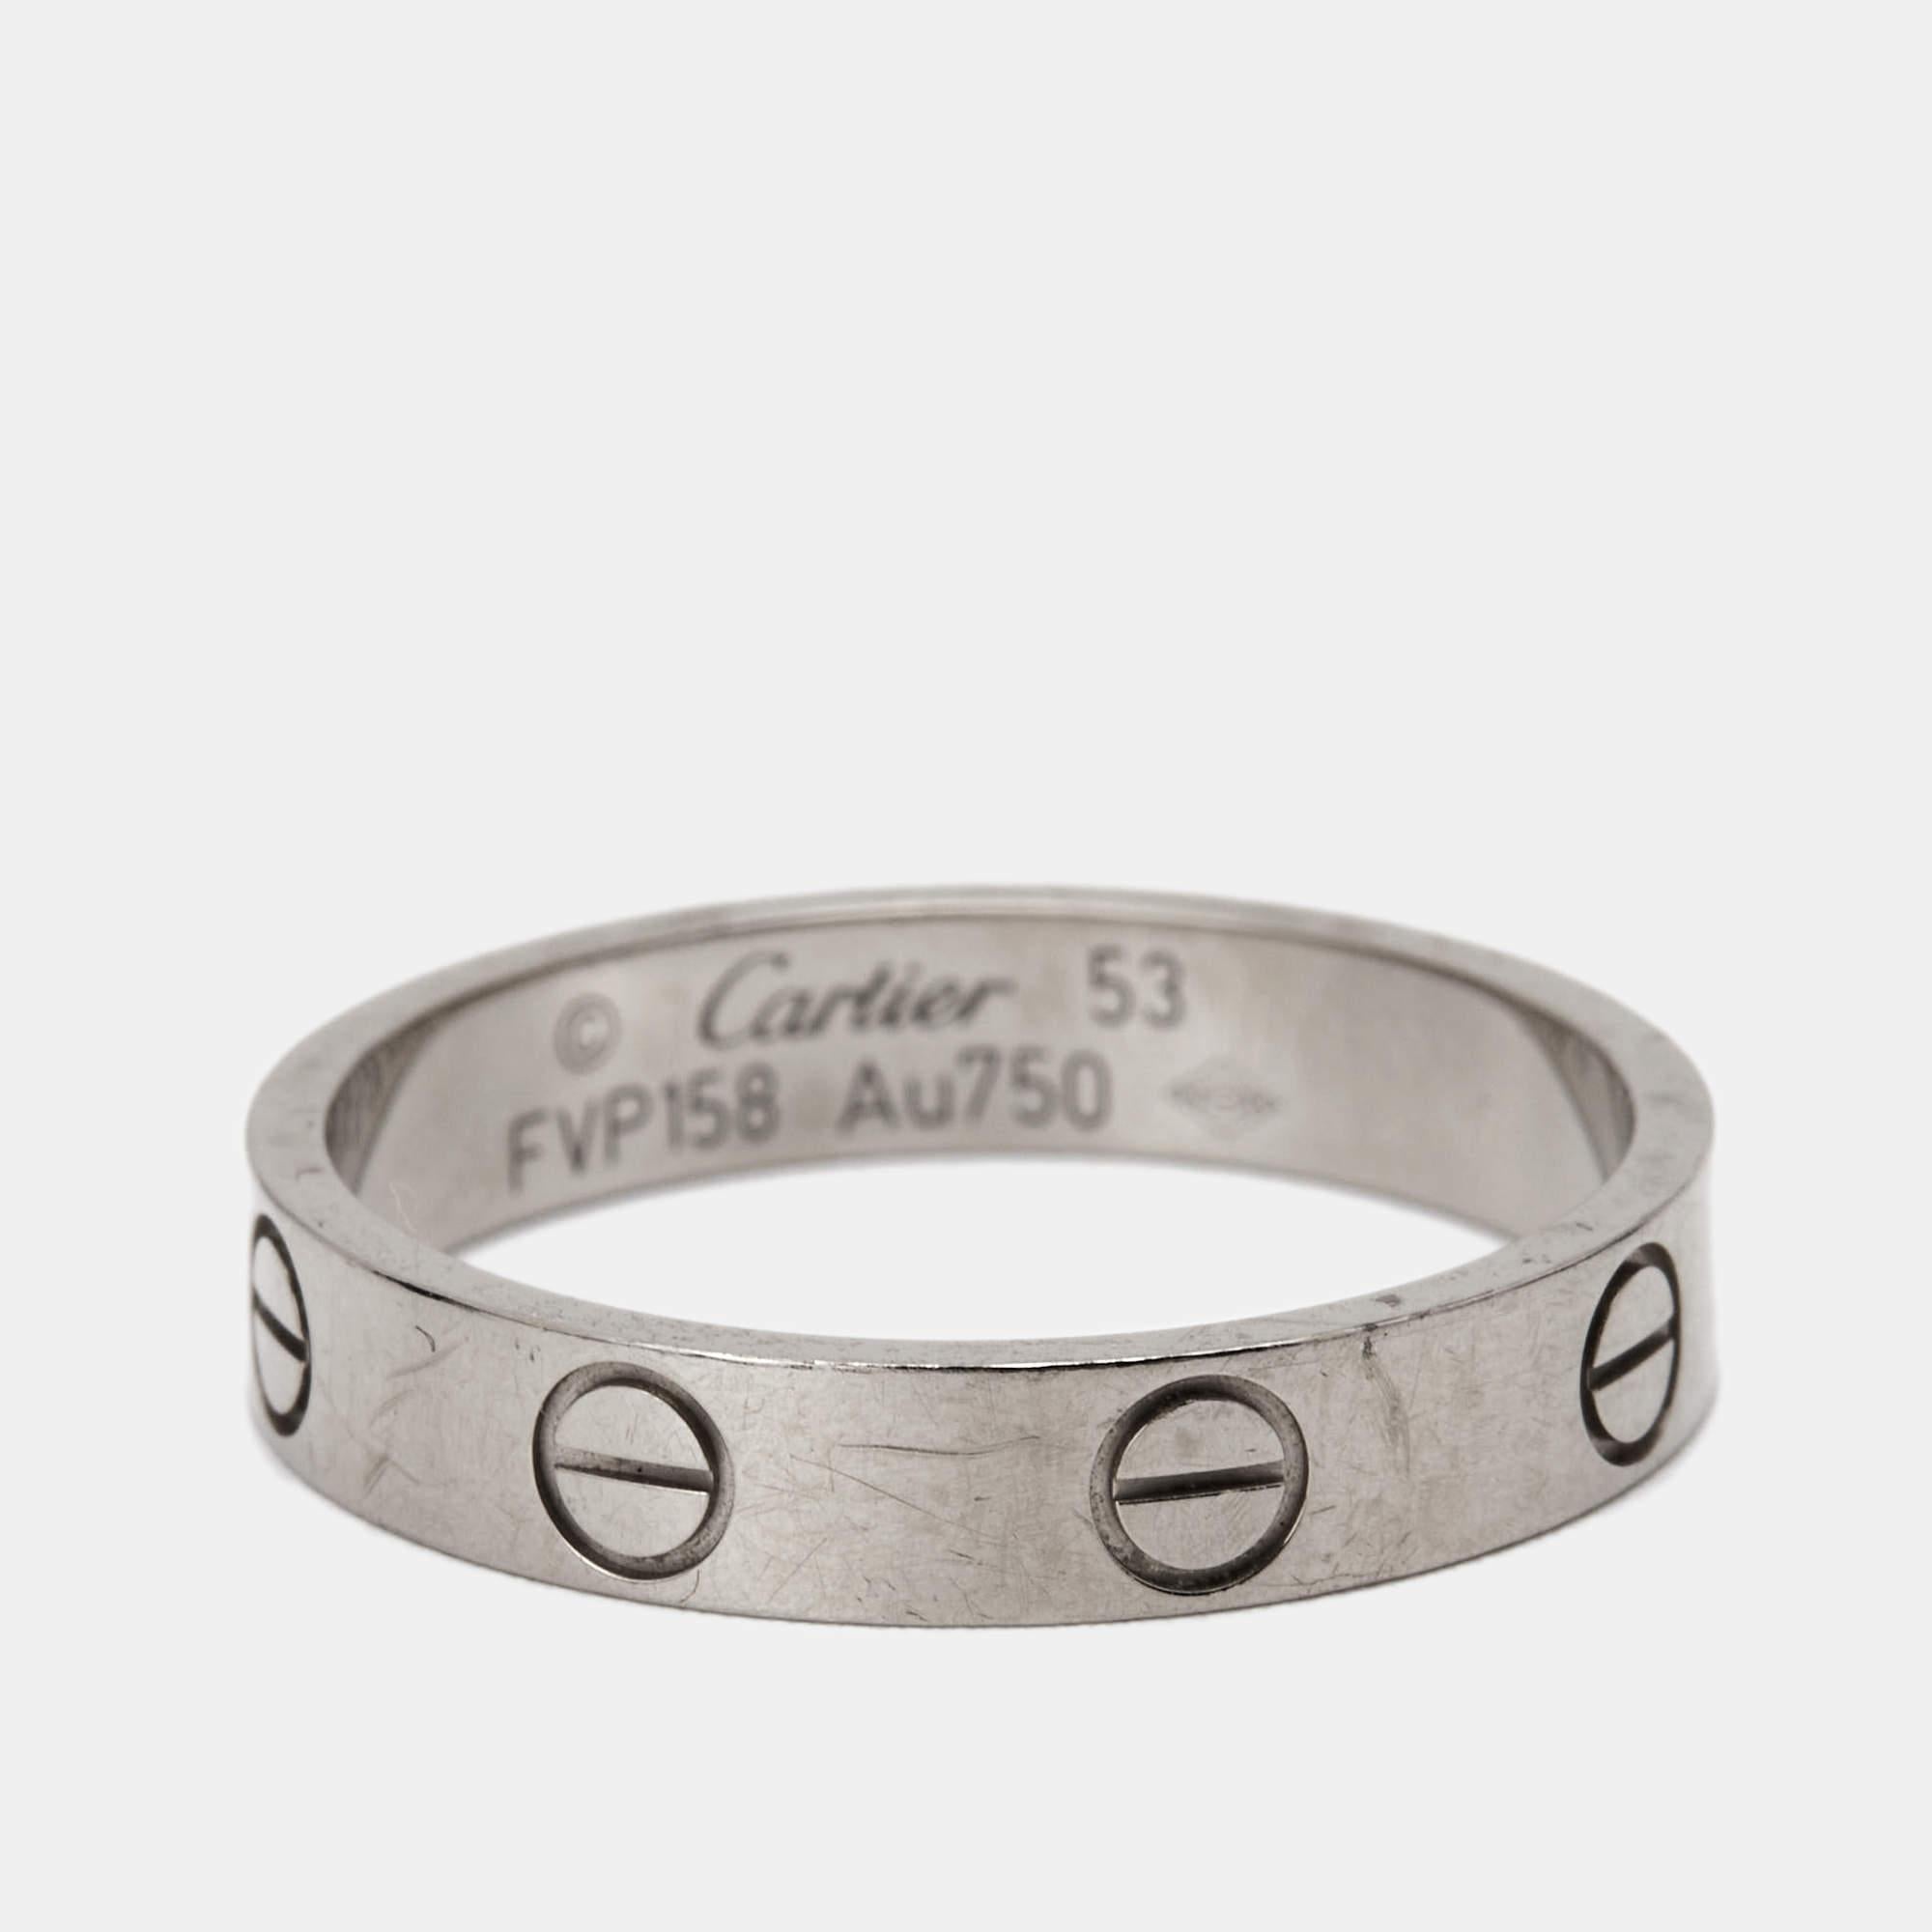 Women's Cartier Love 18K White Gold Narrow Wedding Band Ring Size 53 For Sale